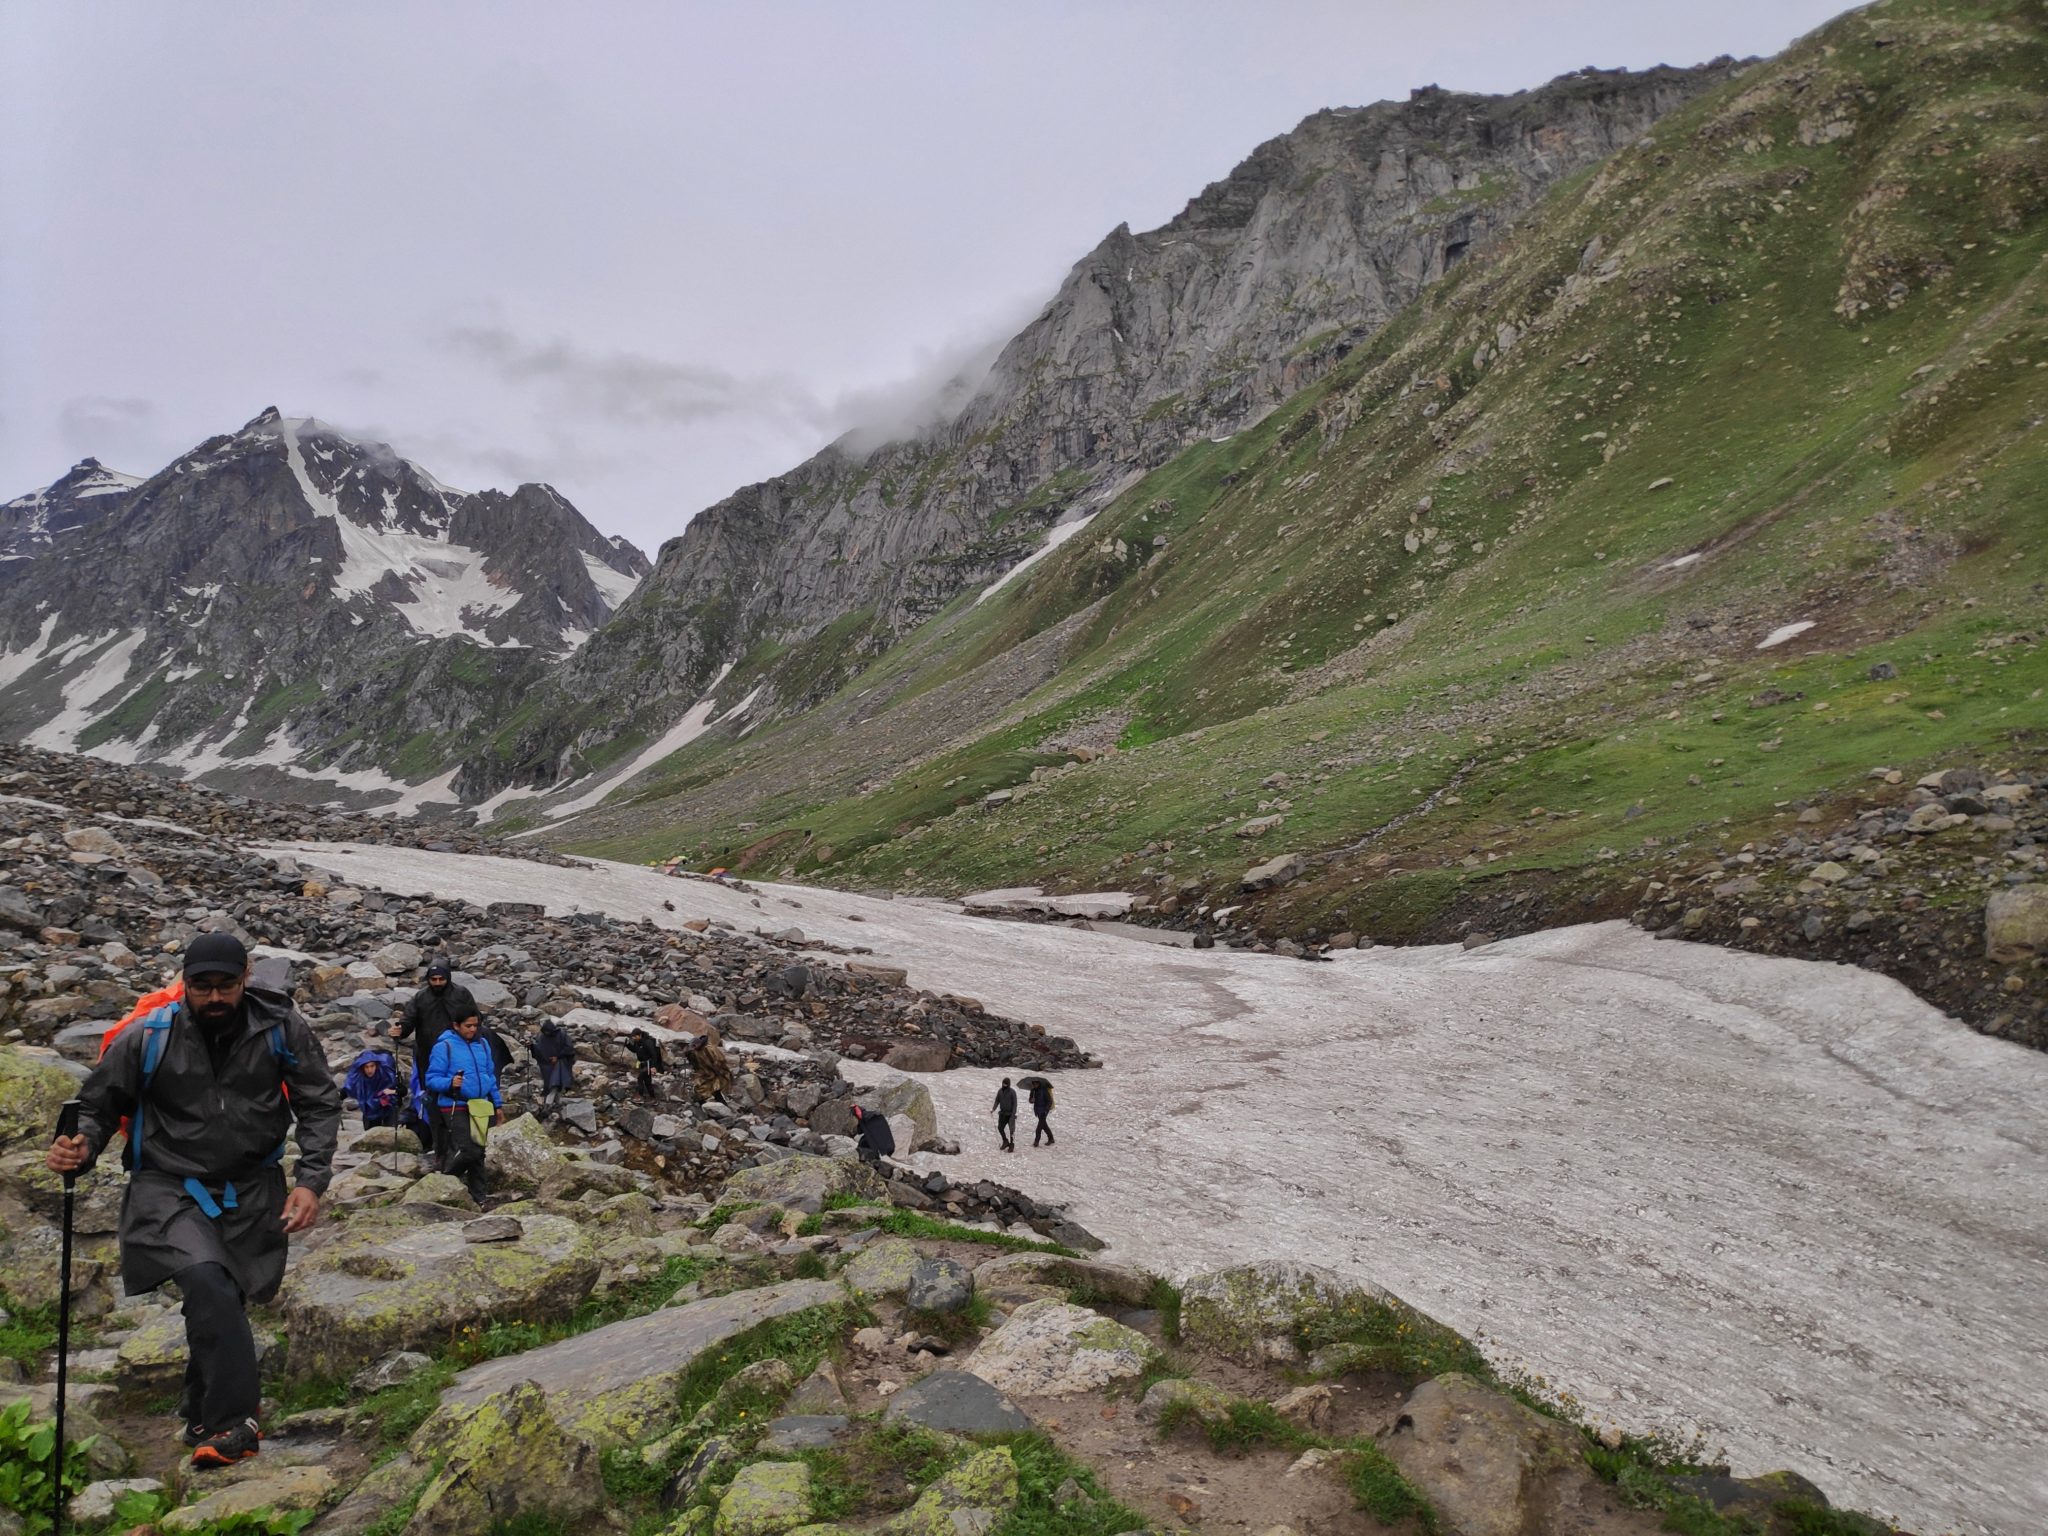 Trekkers crossing a river covered with ice in a mountainous setting